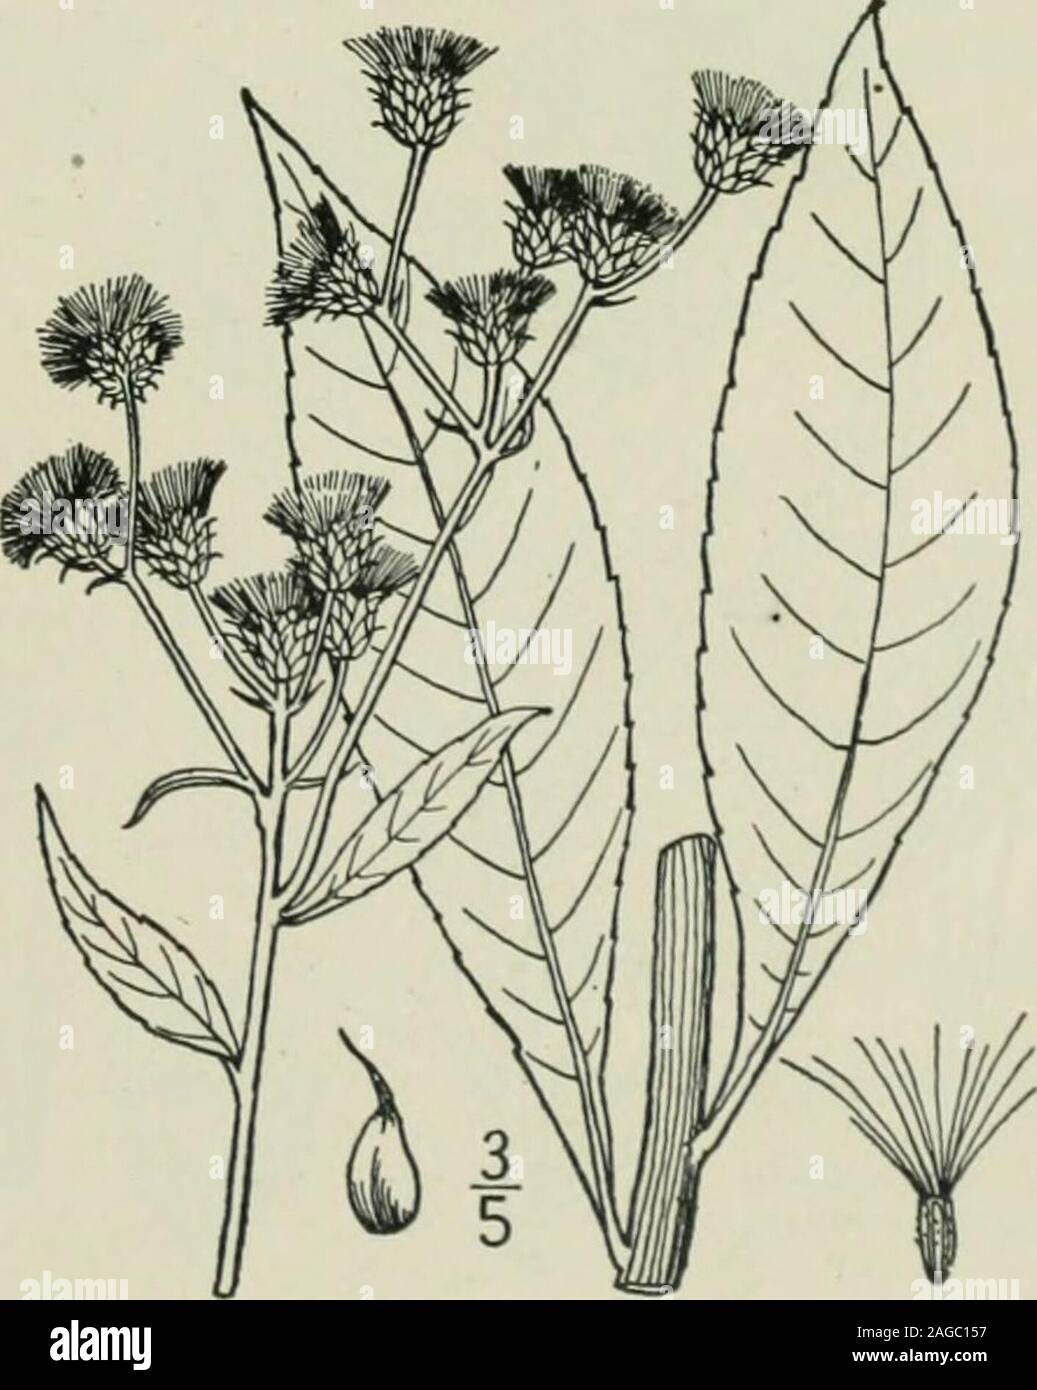 . An illustrated flora of the northern United States, Canada and the British possessions : from Newfoundland to the parallel of the southern boundary of Virginia and from the Atlantic Ocean westward to the 102nd meridian. leaved Iron-weed. Fig. 4142. Serratula glauca L. Sp. PI. 818. 1753. Vernonia noveboracensis var. latifolia A. Gray, Syn. Fl. i: Part 2, 89. 1884.Vernonia glauca Britton, Mem. Torr. Club 5 : 311. 1894. Slender, glabrous or finely puberulent, 2°-5°high. Leaves thin, the lower broadly oval orslightly obovate, sharply serrate, acute or acu-minate, 4-7 long, i-2i wide, the upper n Stock Photo